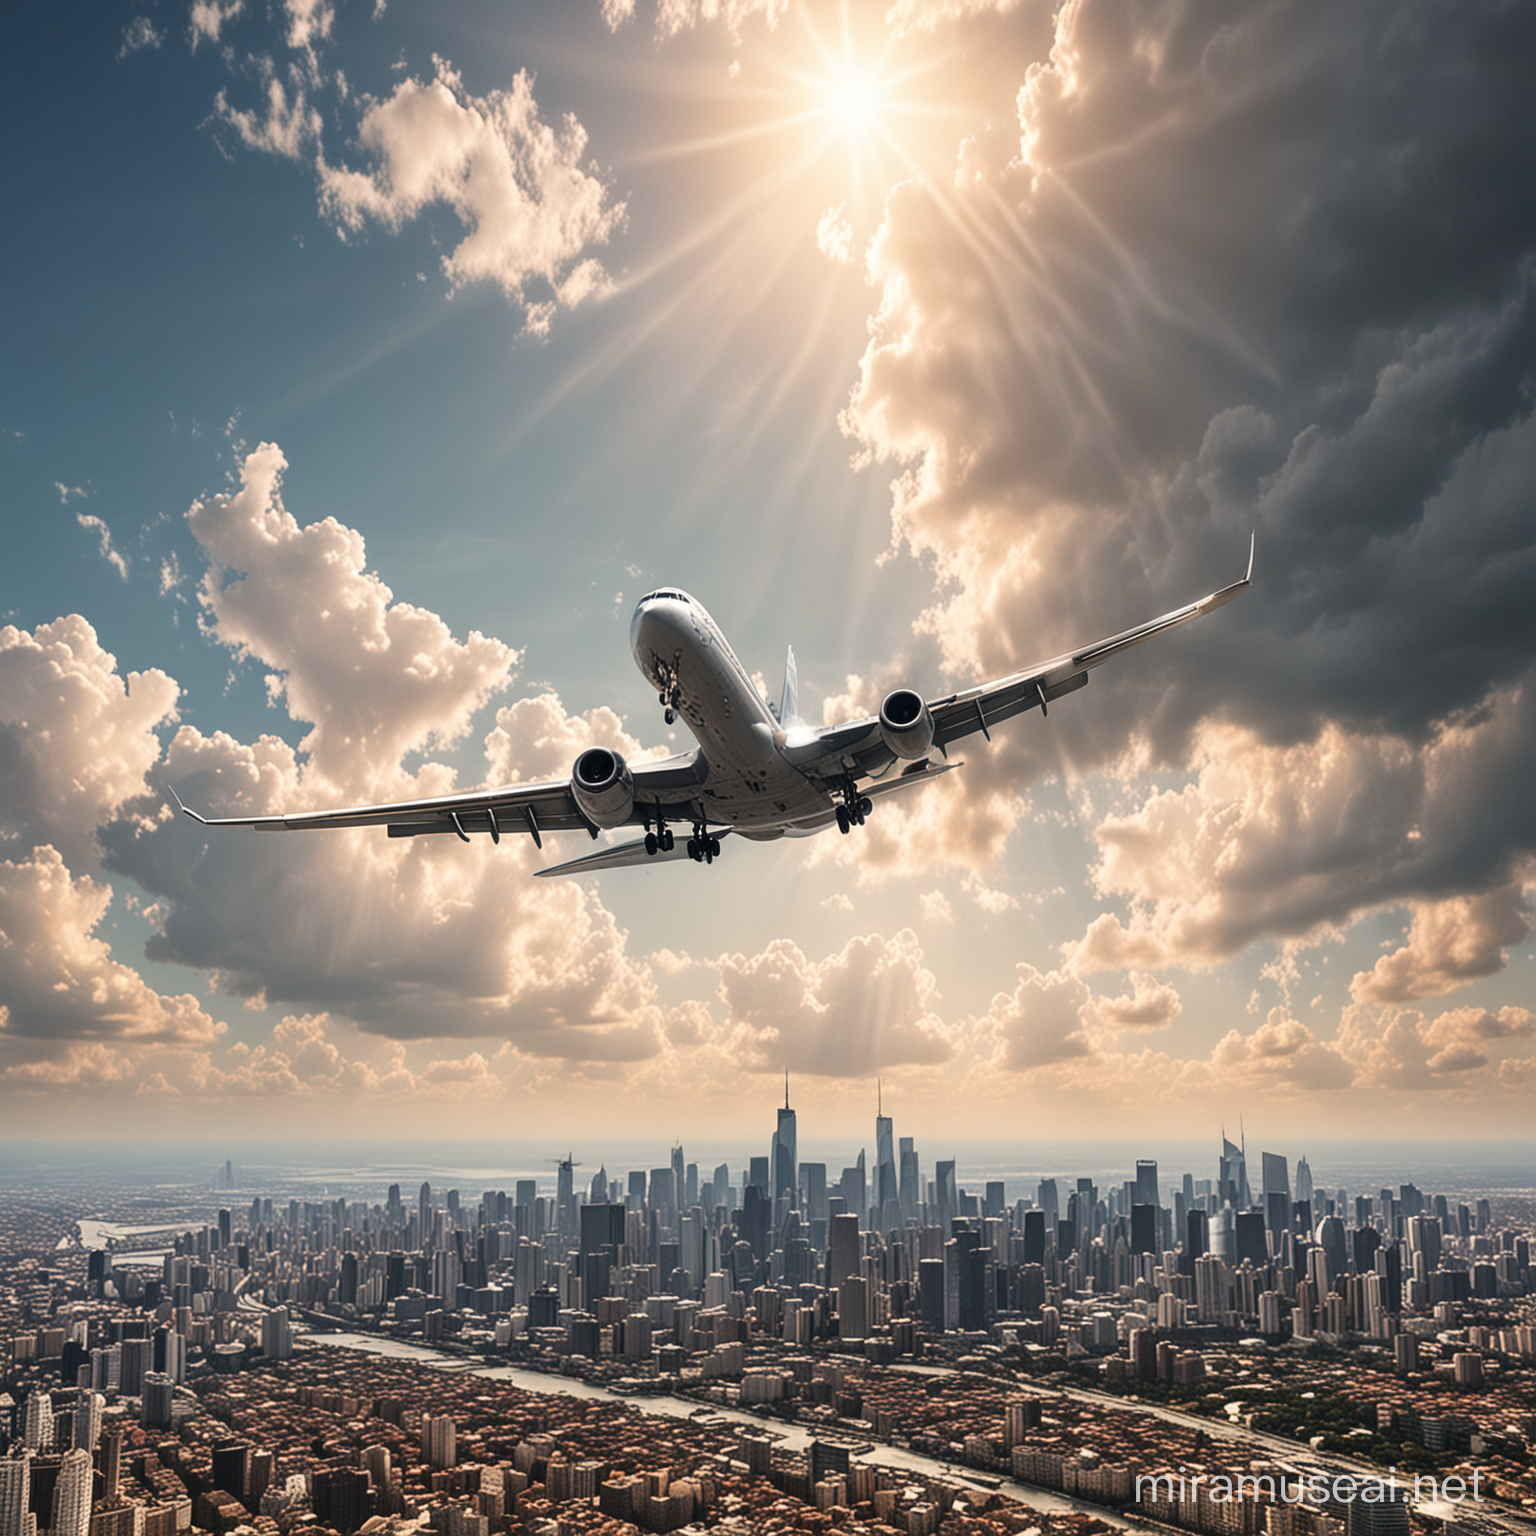 Cityscape with Majestic Airplane Soaring Through Vibrant Sky